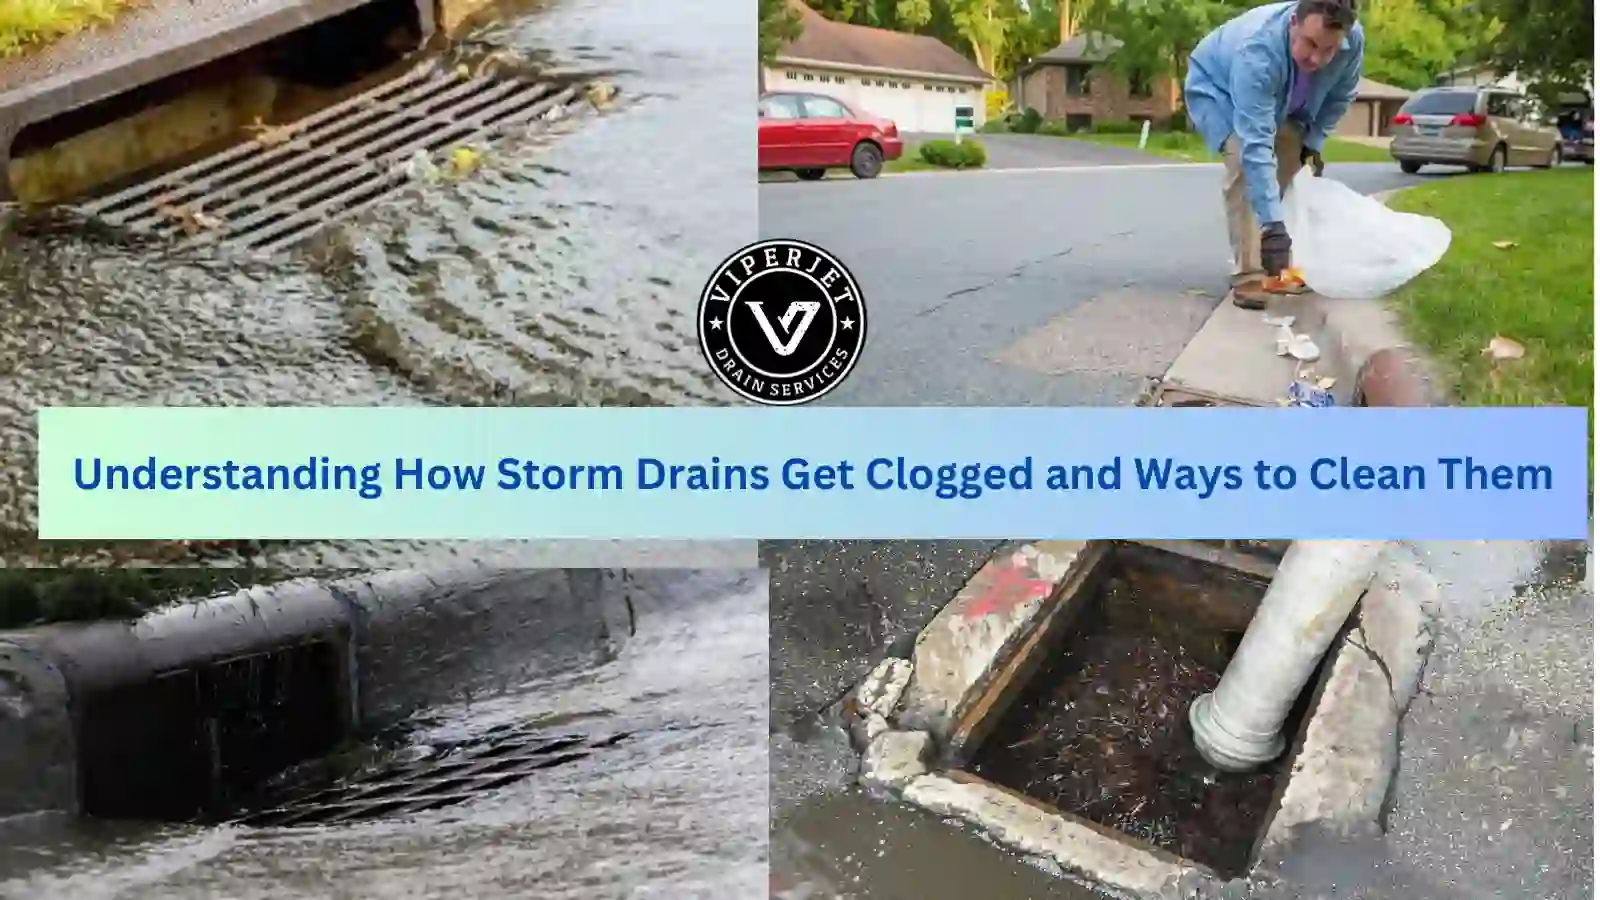 Understanding How Storm Drains Get Clogged and Ways to Clean Them